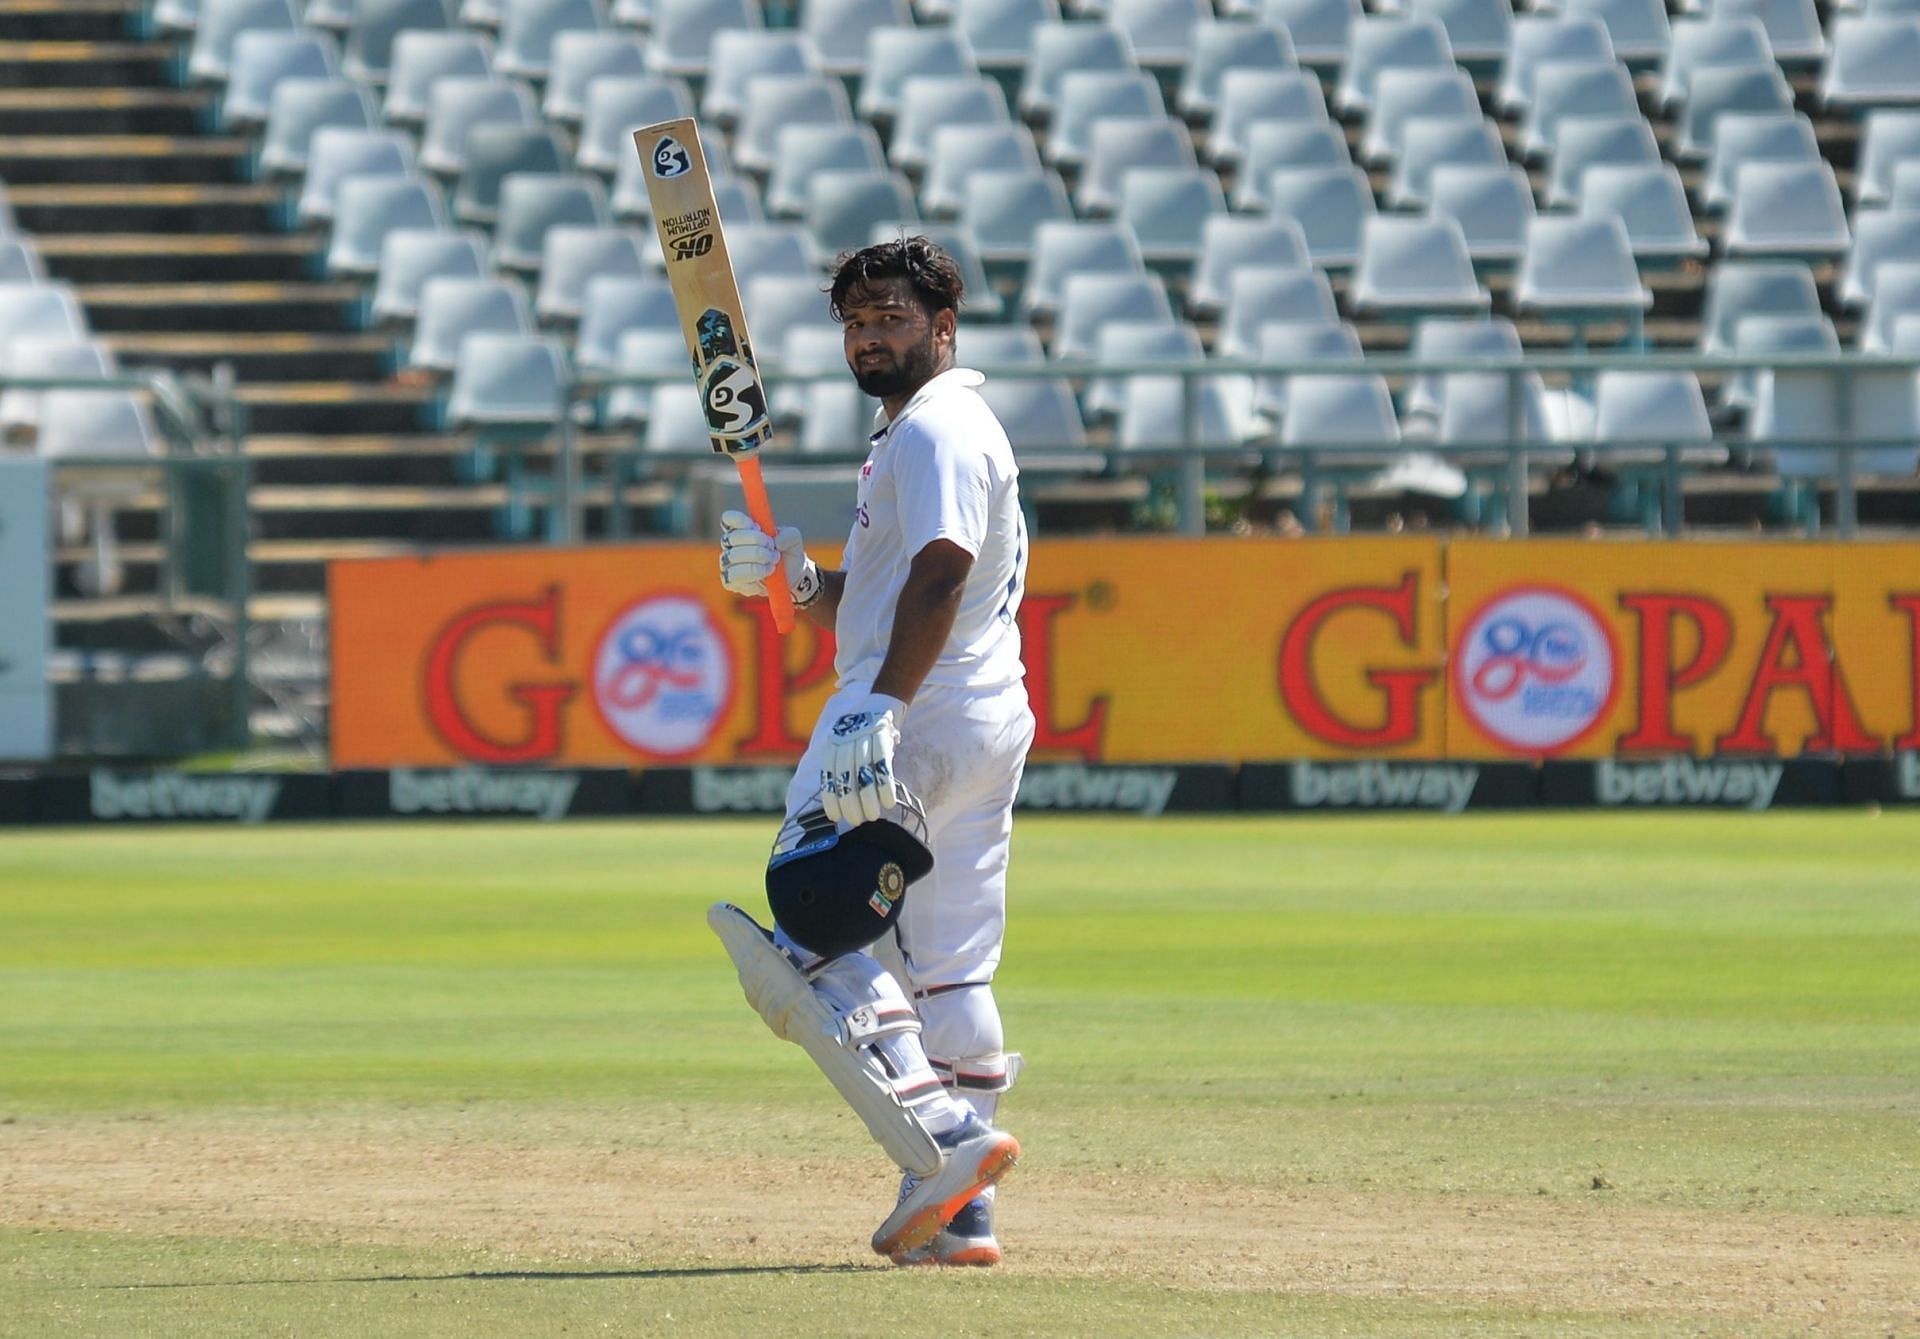 Risabh Pant became the first Indian wicket keeper to score three away Test centuries during his knock of 100* in the second innings of the third Test match at Cape Town